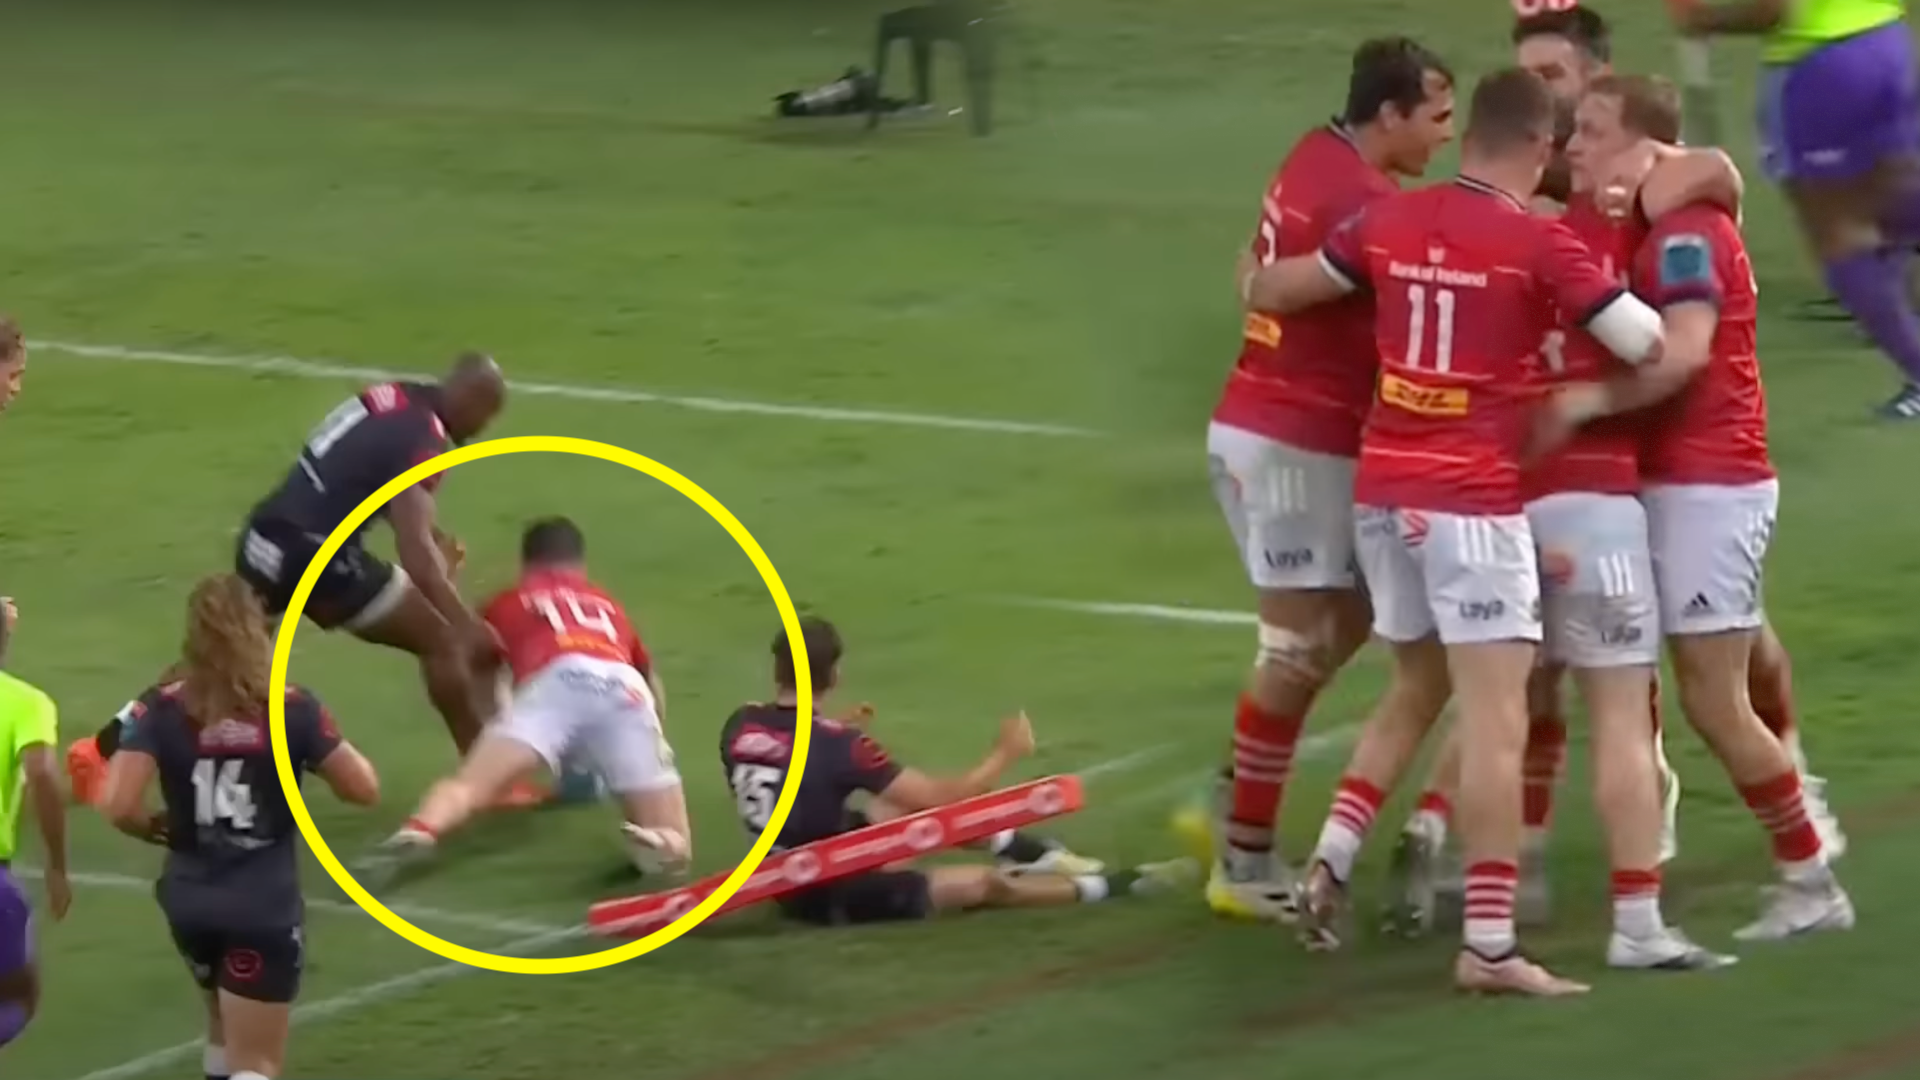 'That is terrible officiating- TMO was wrong, ref was wrong, everyone was wrong'